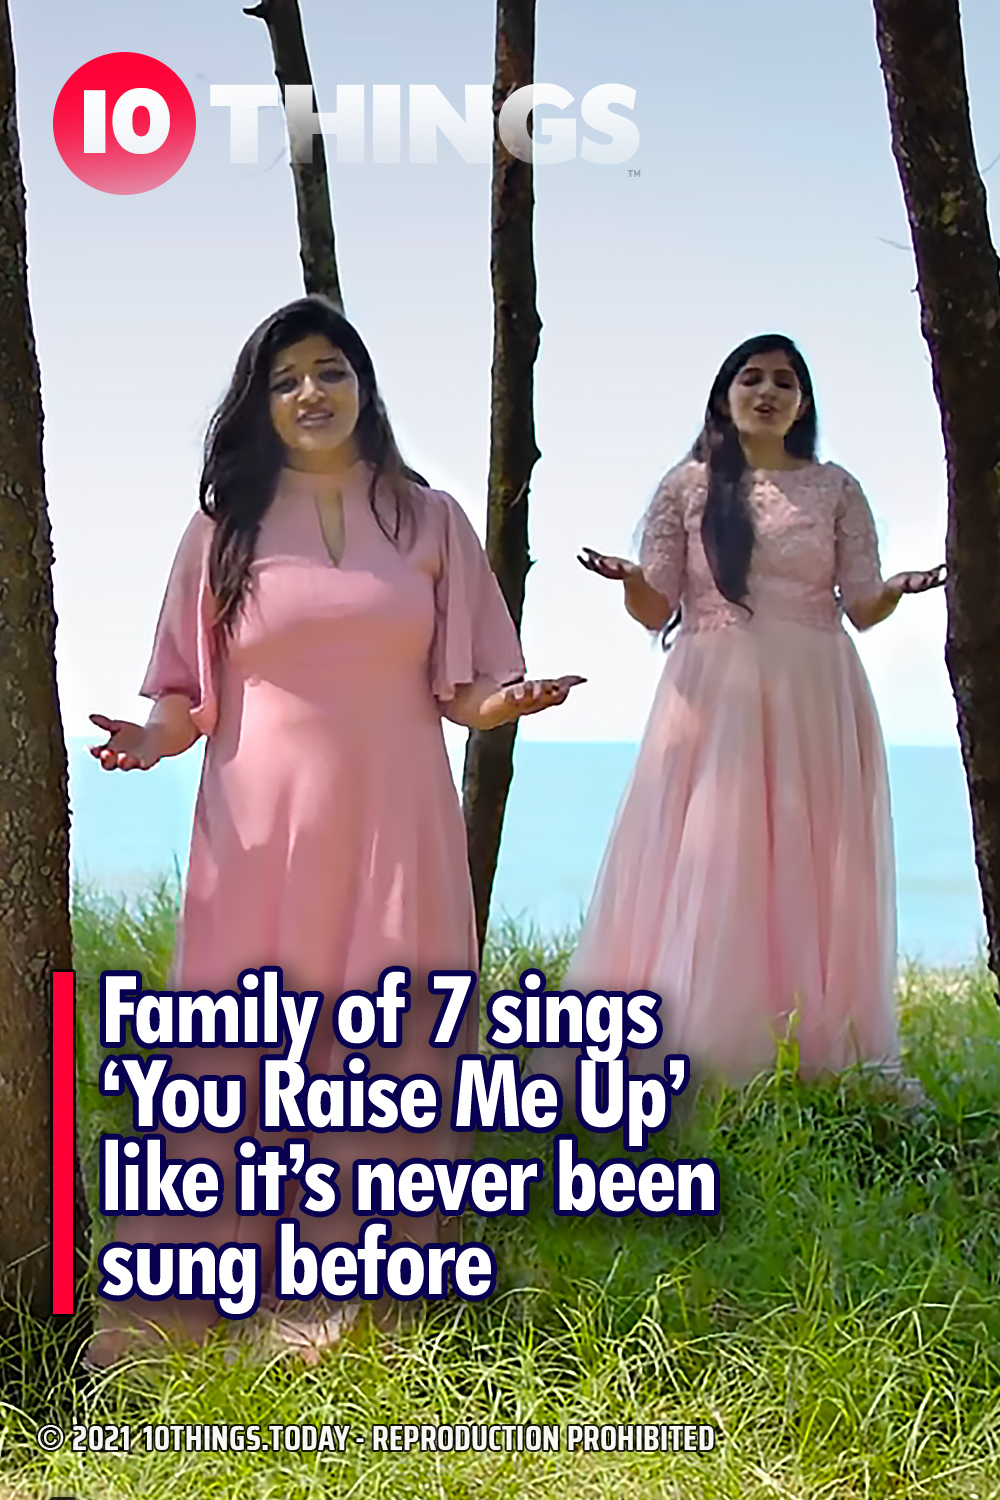 Family of 7 sings ‘You Raise Me Up’ like it’s never been sung before